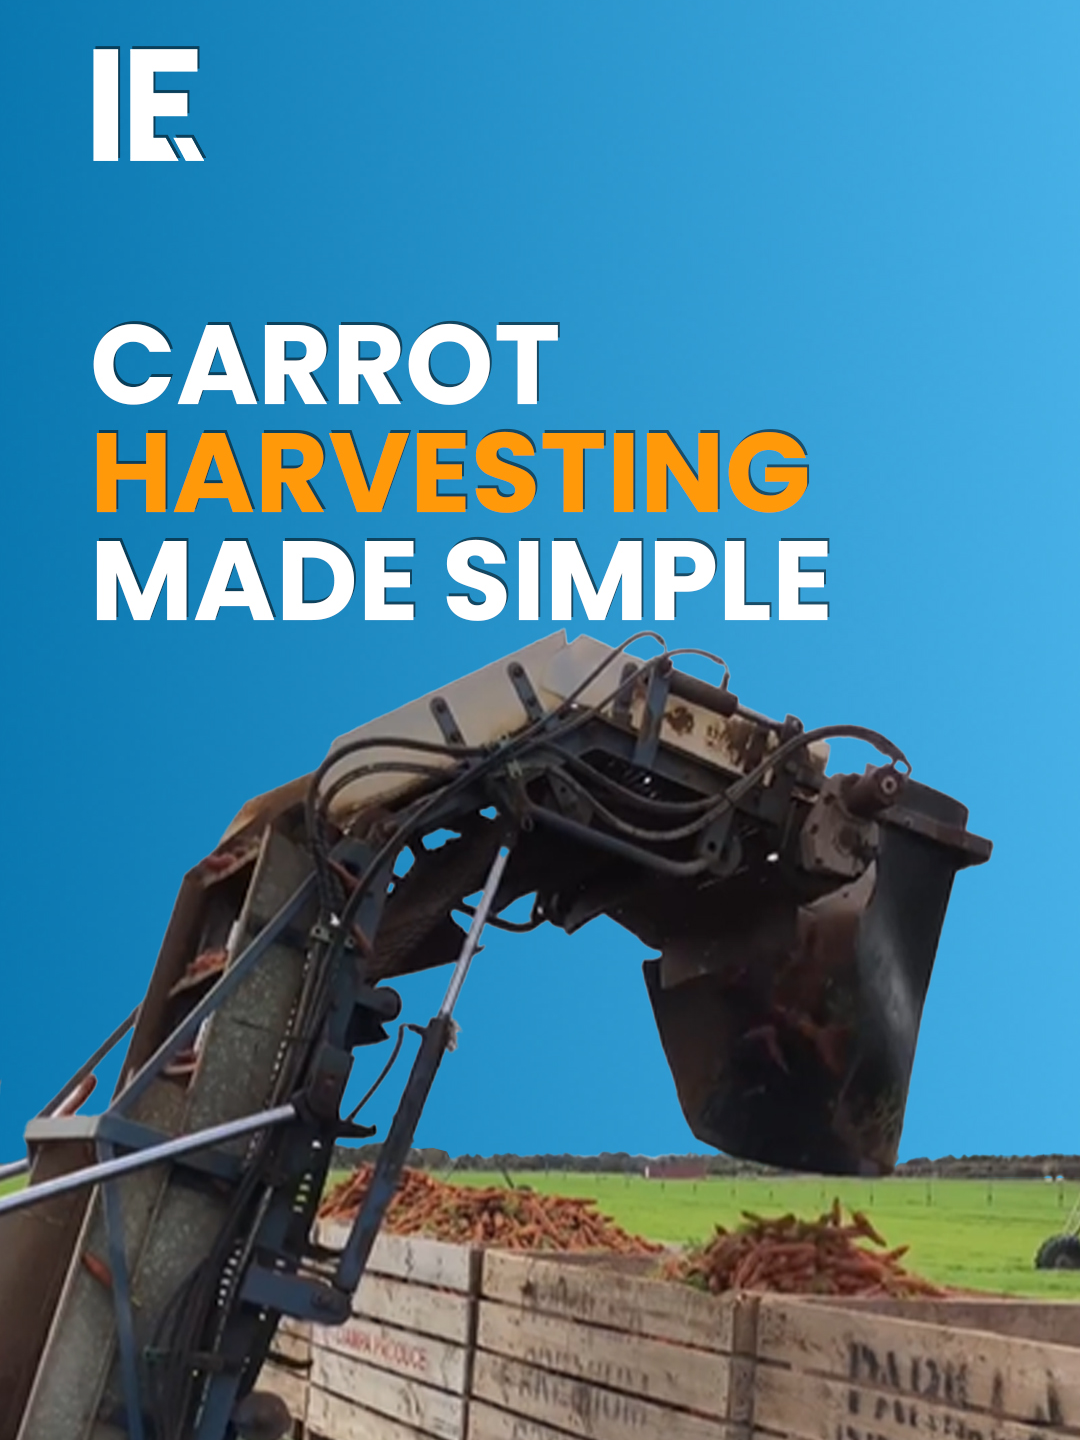 New tech-assisted farming means harvesting carrots has never been easier. #HarvestingCarrots #EasierFarming #CarrotHarvest #FarmingTech